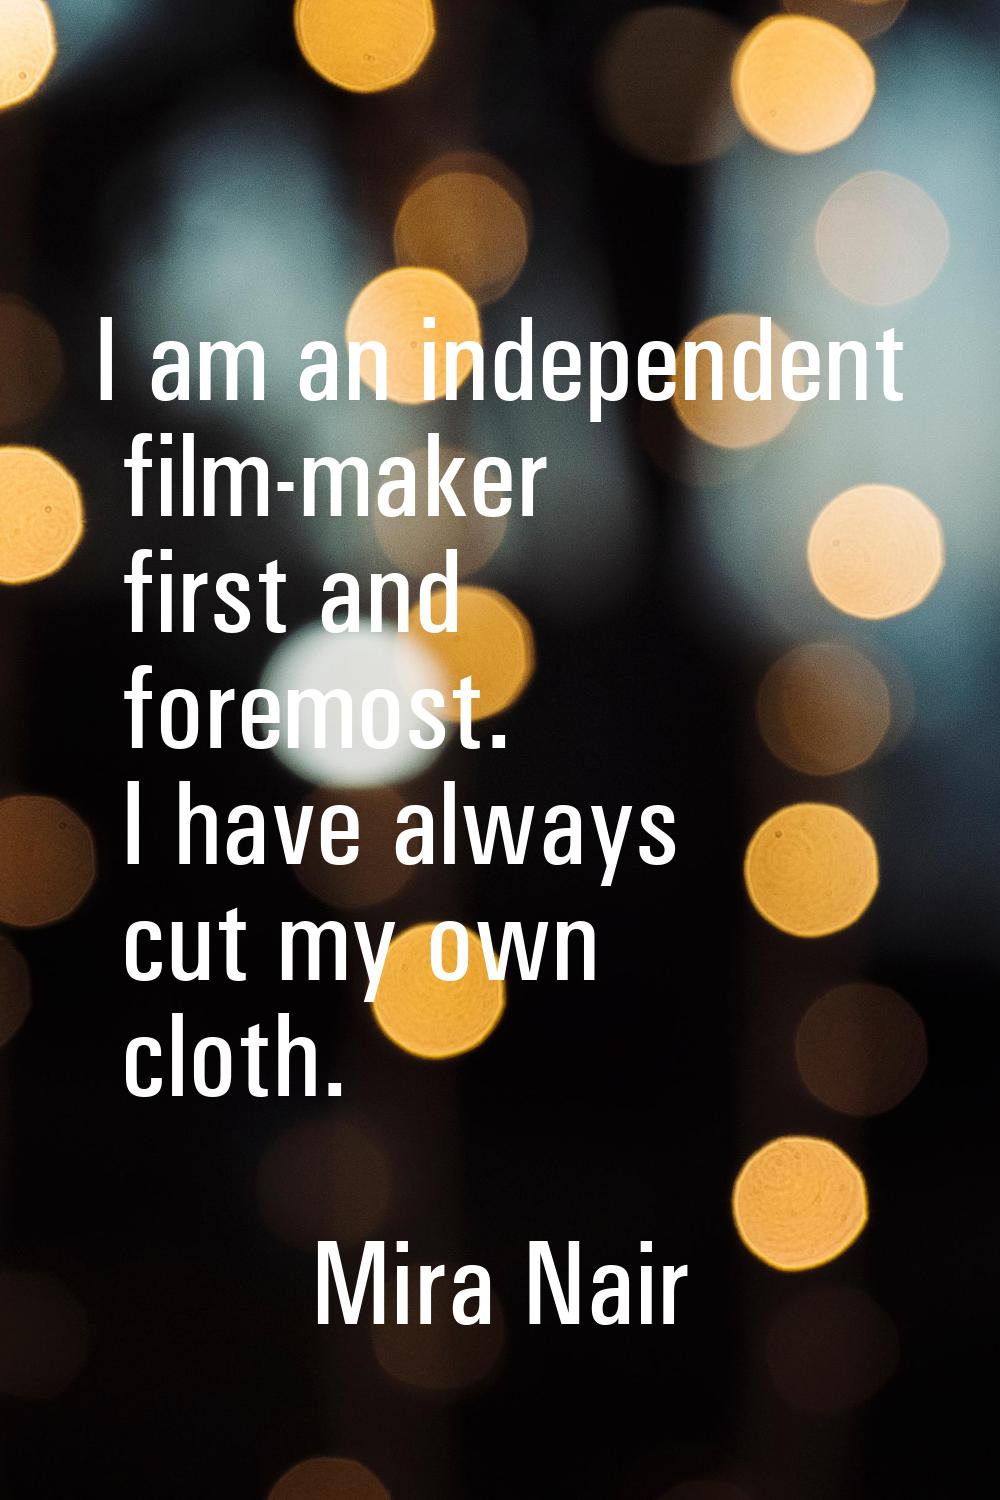 I am an independent film-maker first and foremost. I have always cut my own cloth.